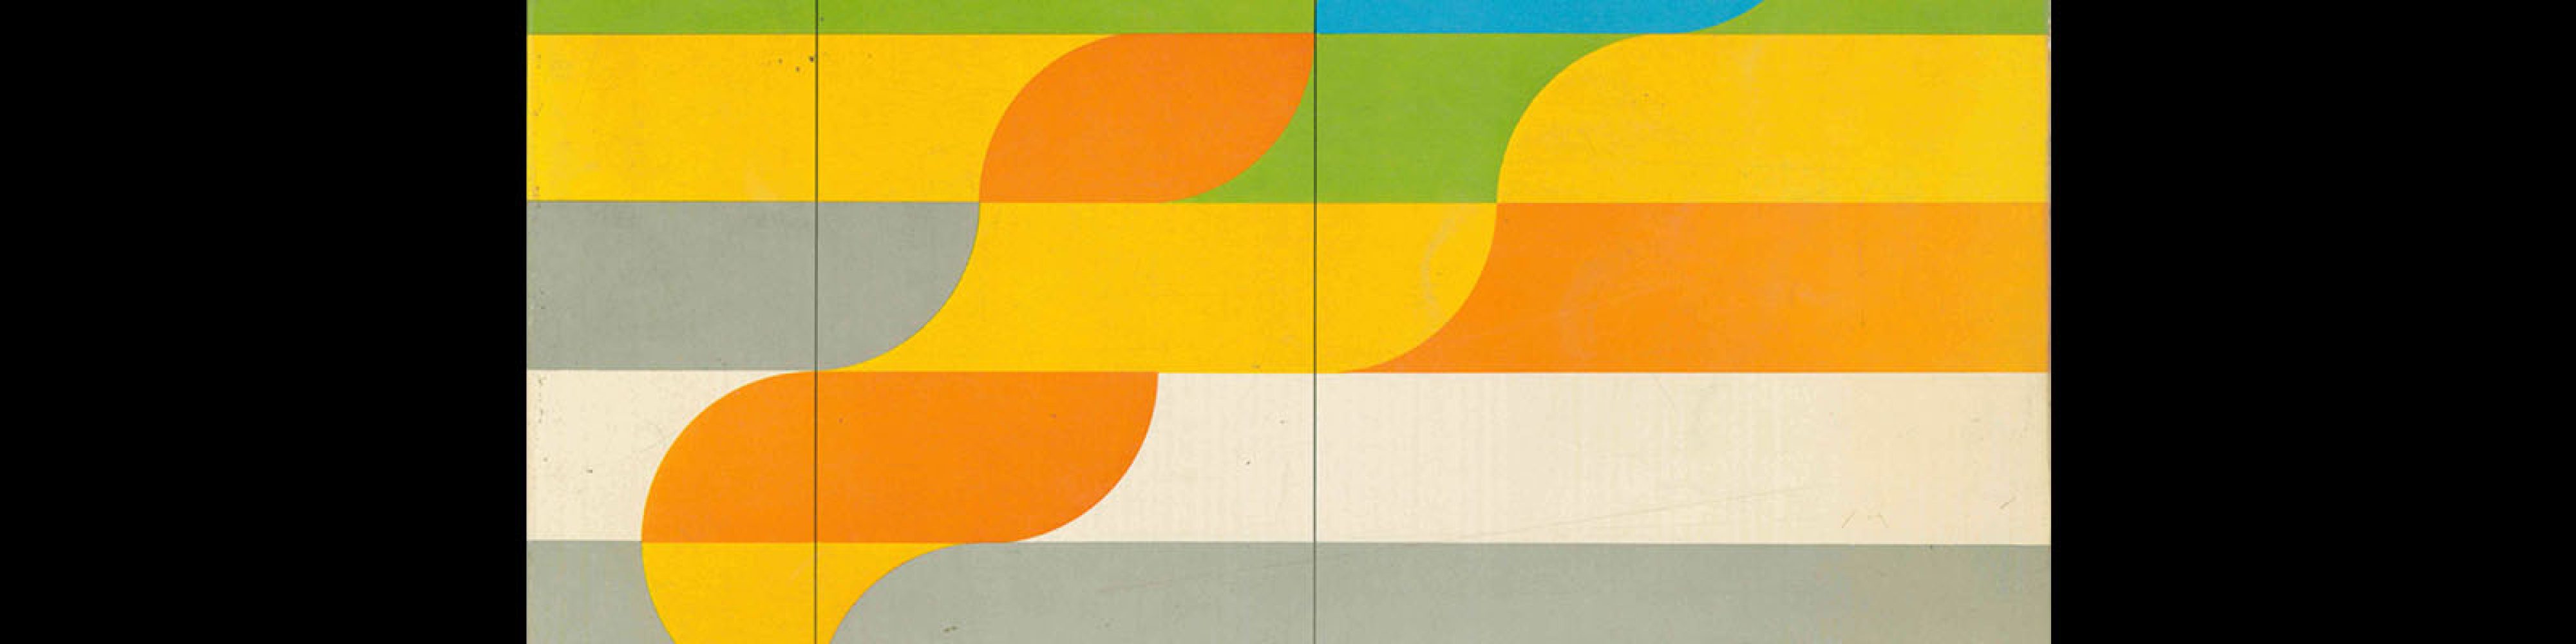 Graphis 160, 1972. Cover design by Visual Group of the Olympic Games 1972.